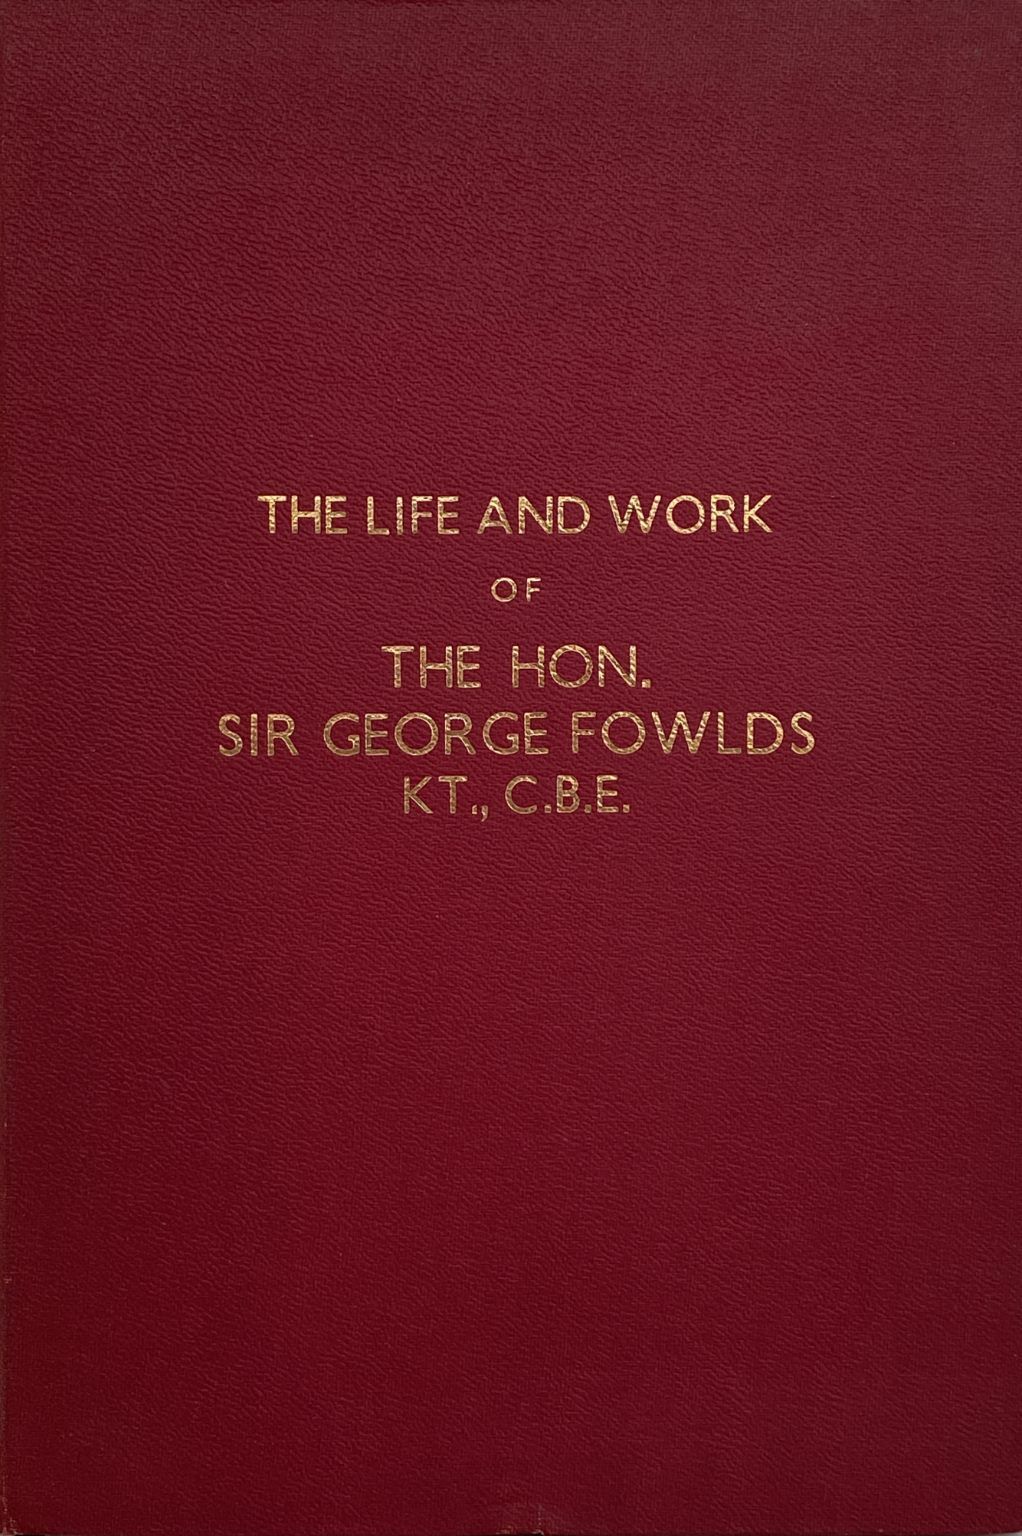 THE HON. SIR GEORGE FOWLDS: The Life and Work of